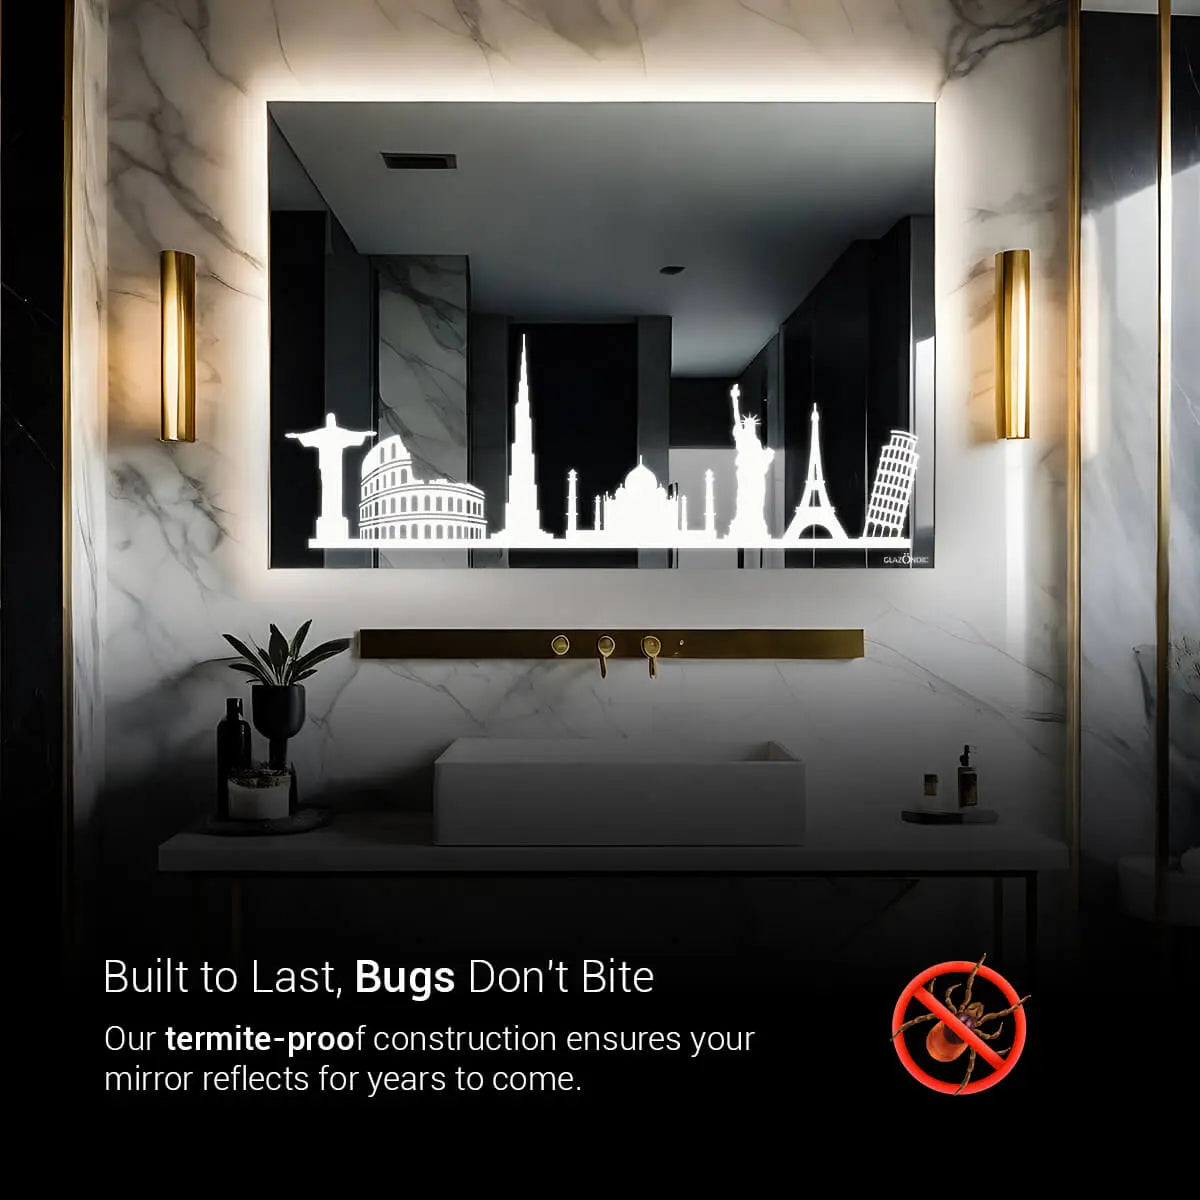 A rectangular bathroom mirror with a black silhouette of a city skyline etched onto the bottom corner. Text overlaid on the mirror reads: "Built to Last, Bugs Don't Bite. Our termite-proof construction ensures your mirror reflects for years to come